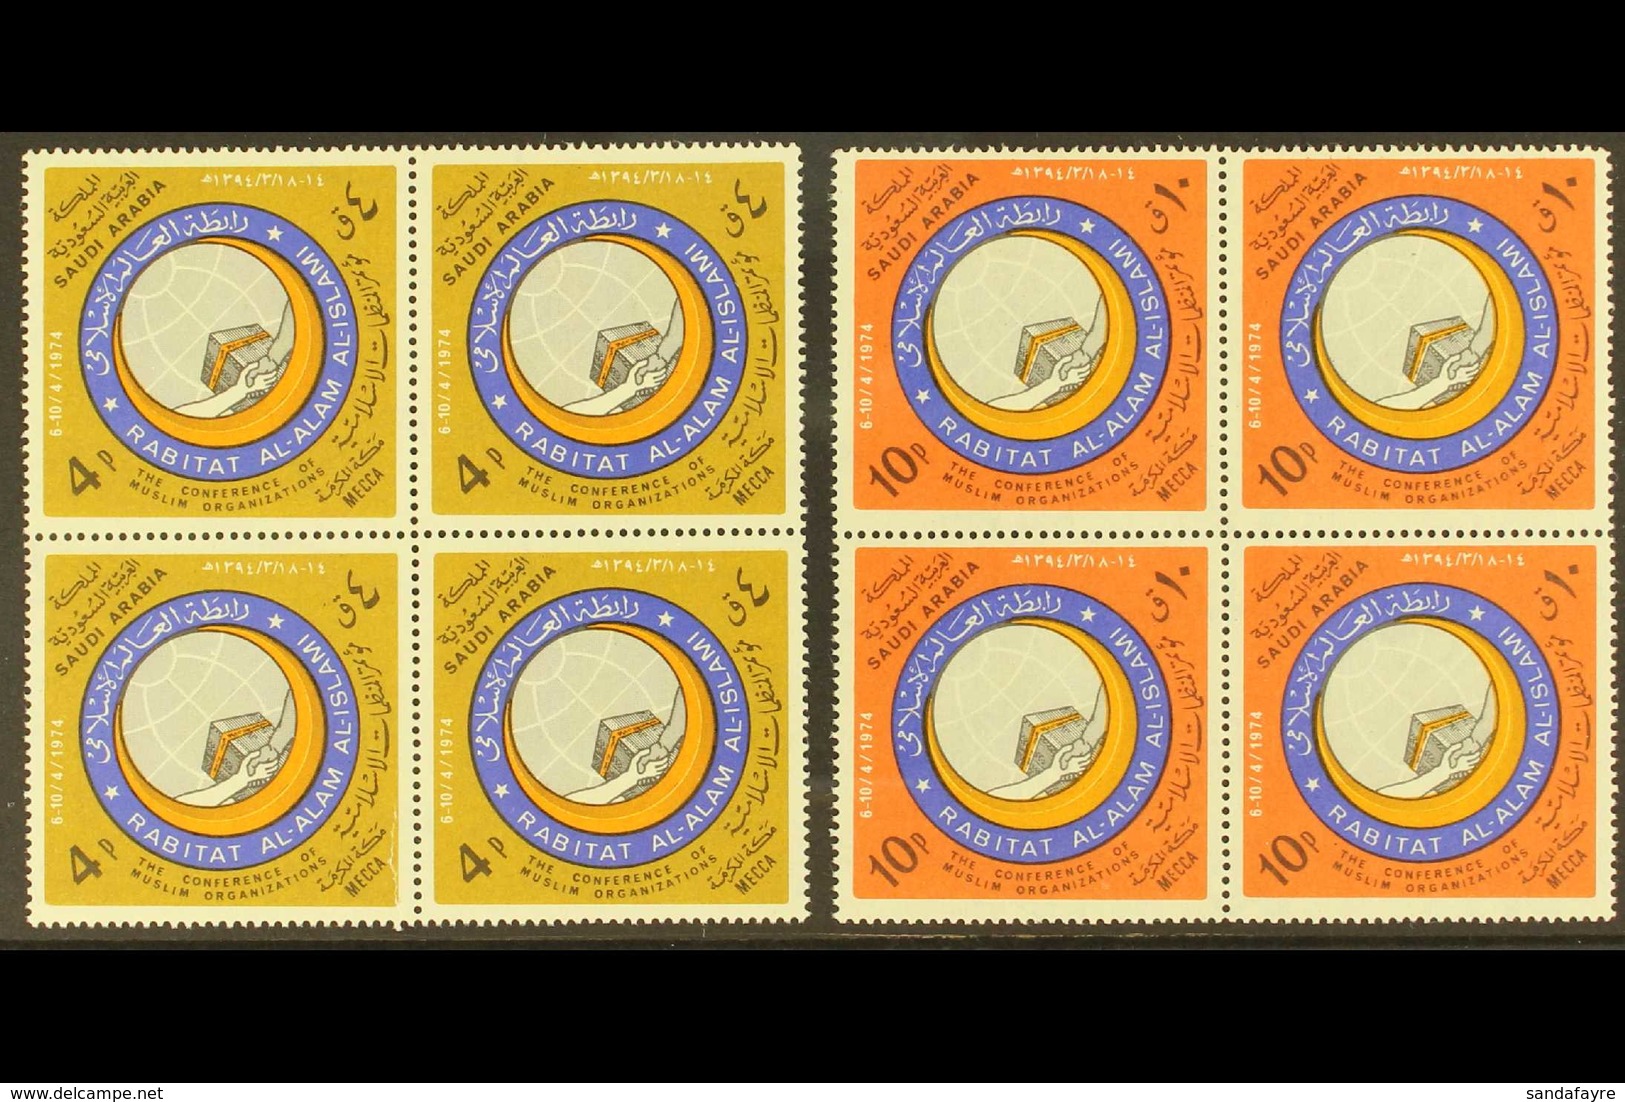 1975 Moslem Organisations Conference, SG 1106/7, In Very Fine Never Hinged Mint Blocks Of 4. (8 Stamps) For More Images, - Arabie Saoudite